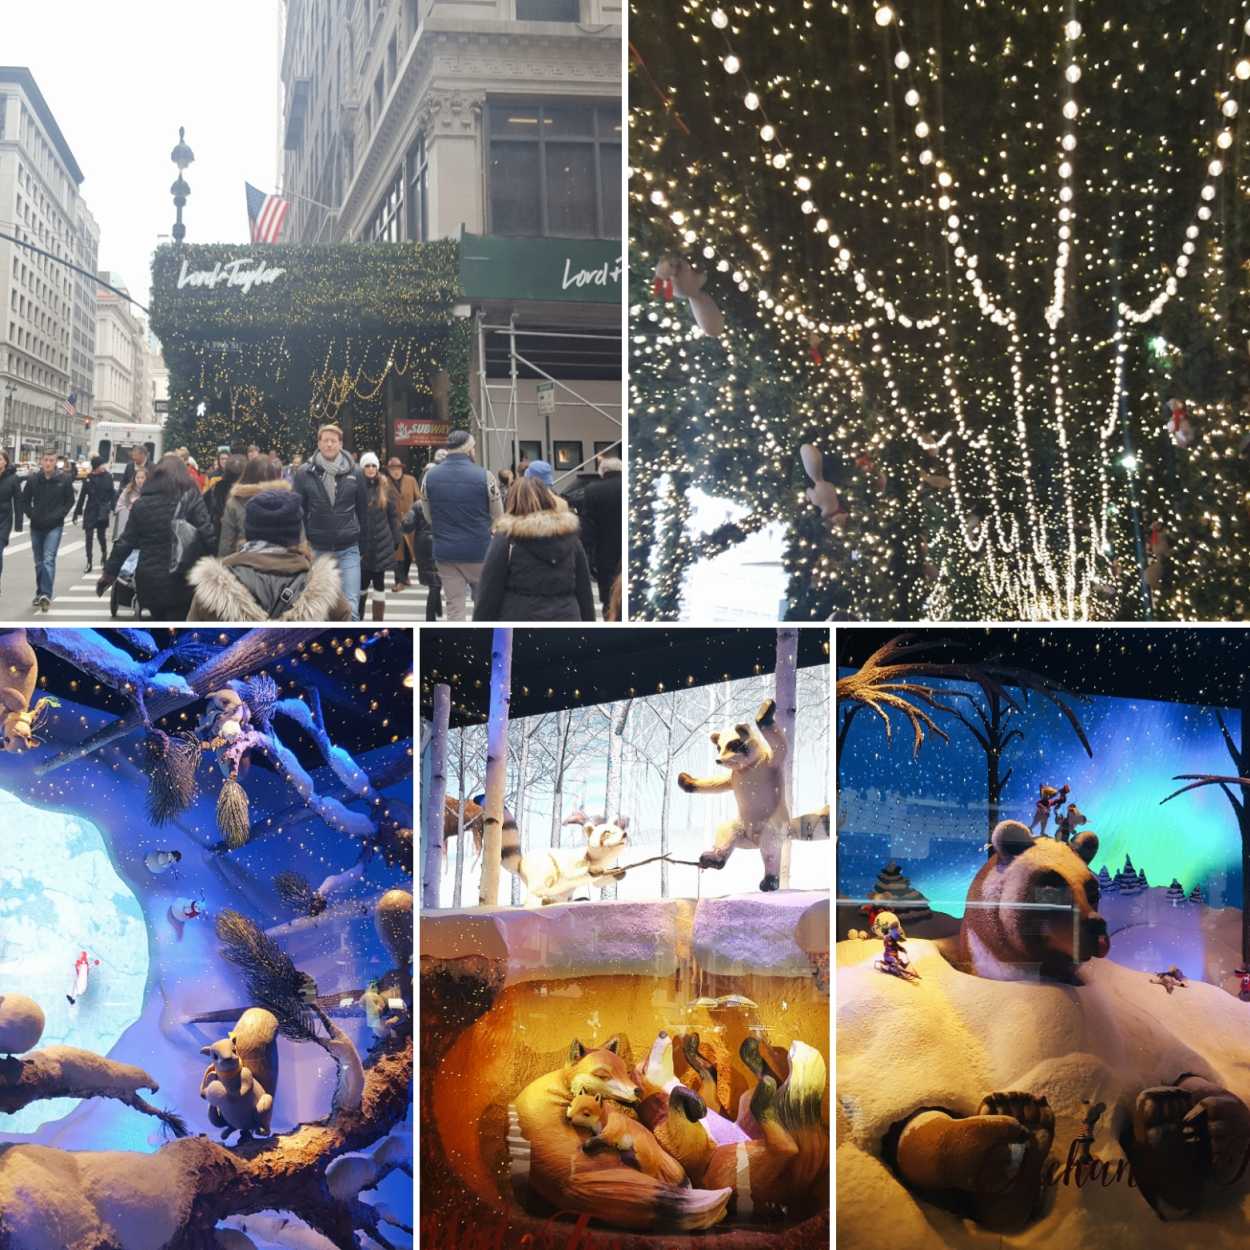 Collage of Lord and Taylor's Christmas window display